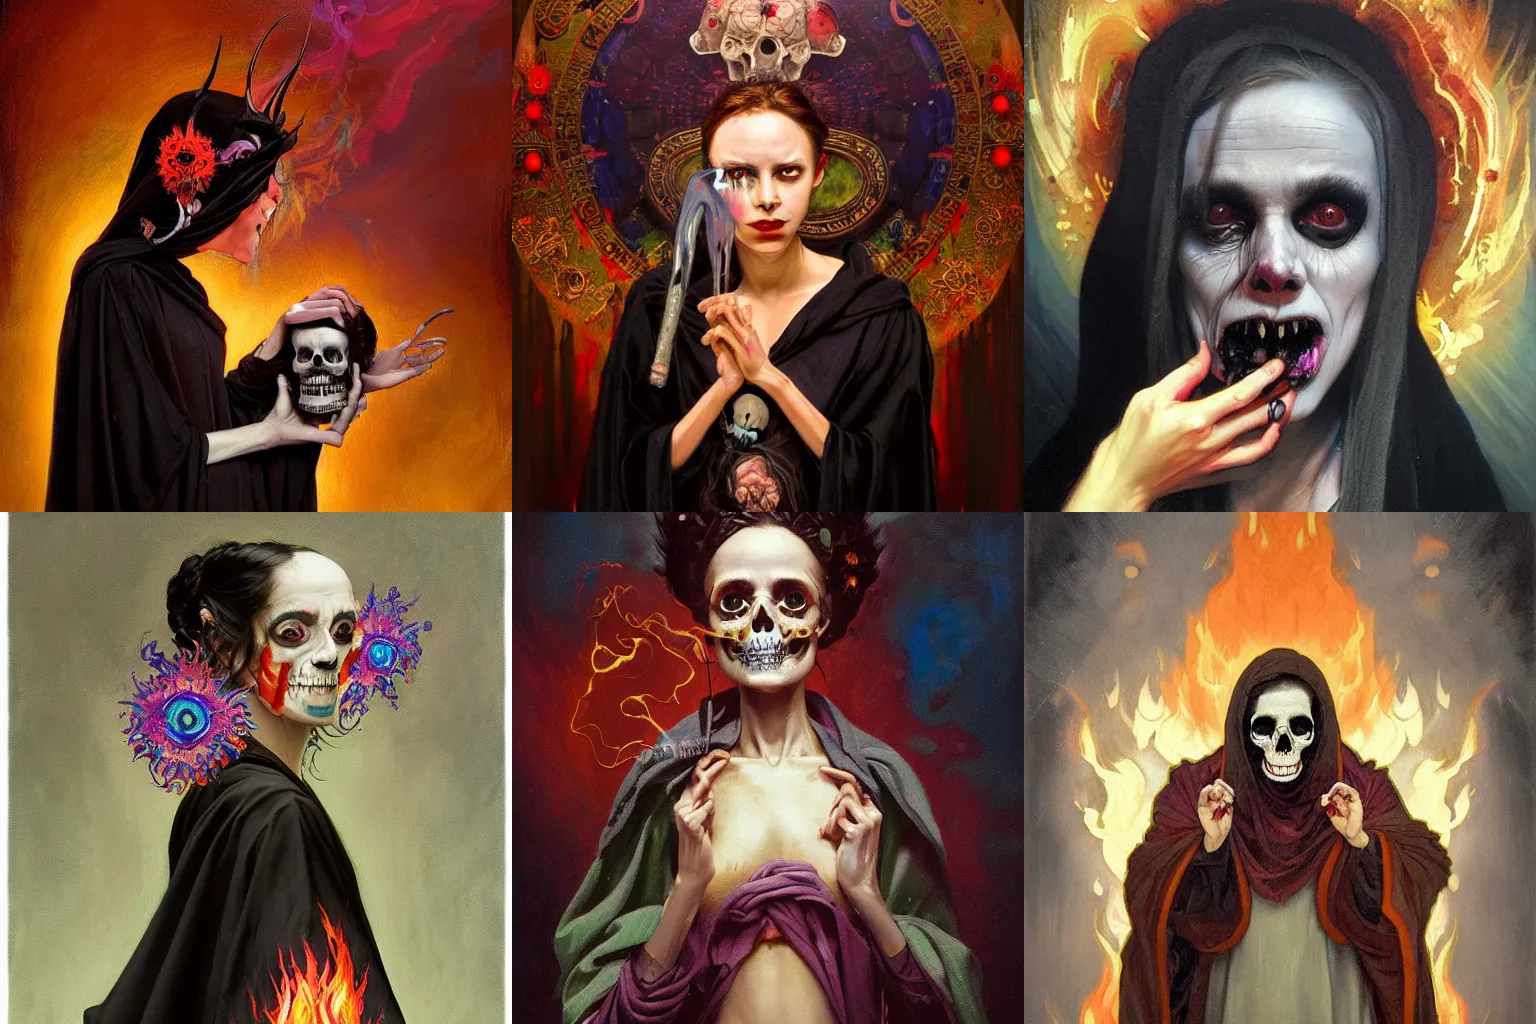 Prompt: An hysterical which stares at a deep black skull with in her hand! She wear a long dark robe. The background is made of multicolored fire. Painted by Tony Sandoval, Caravaggio, Greg rutkowski, Sachin Teng, Thomas Kindkade, Alphonse Mucha, Norman Rockwell, Tom Bagshaw. Oil painting. Pastel colors scheme.